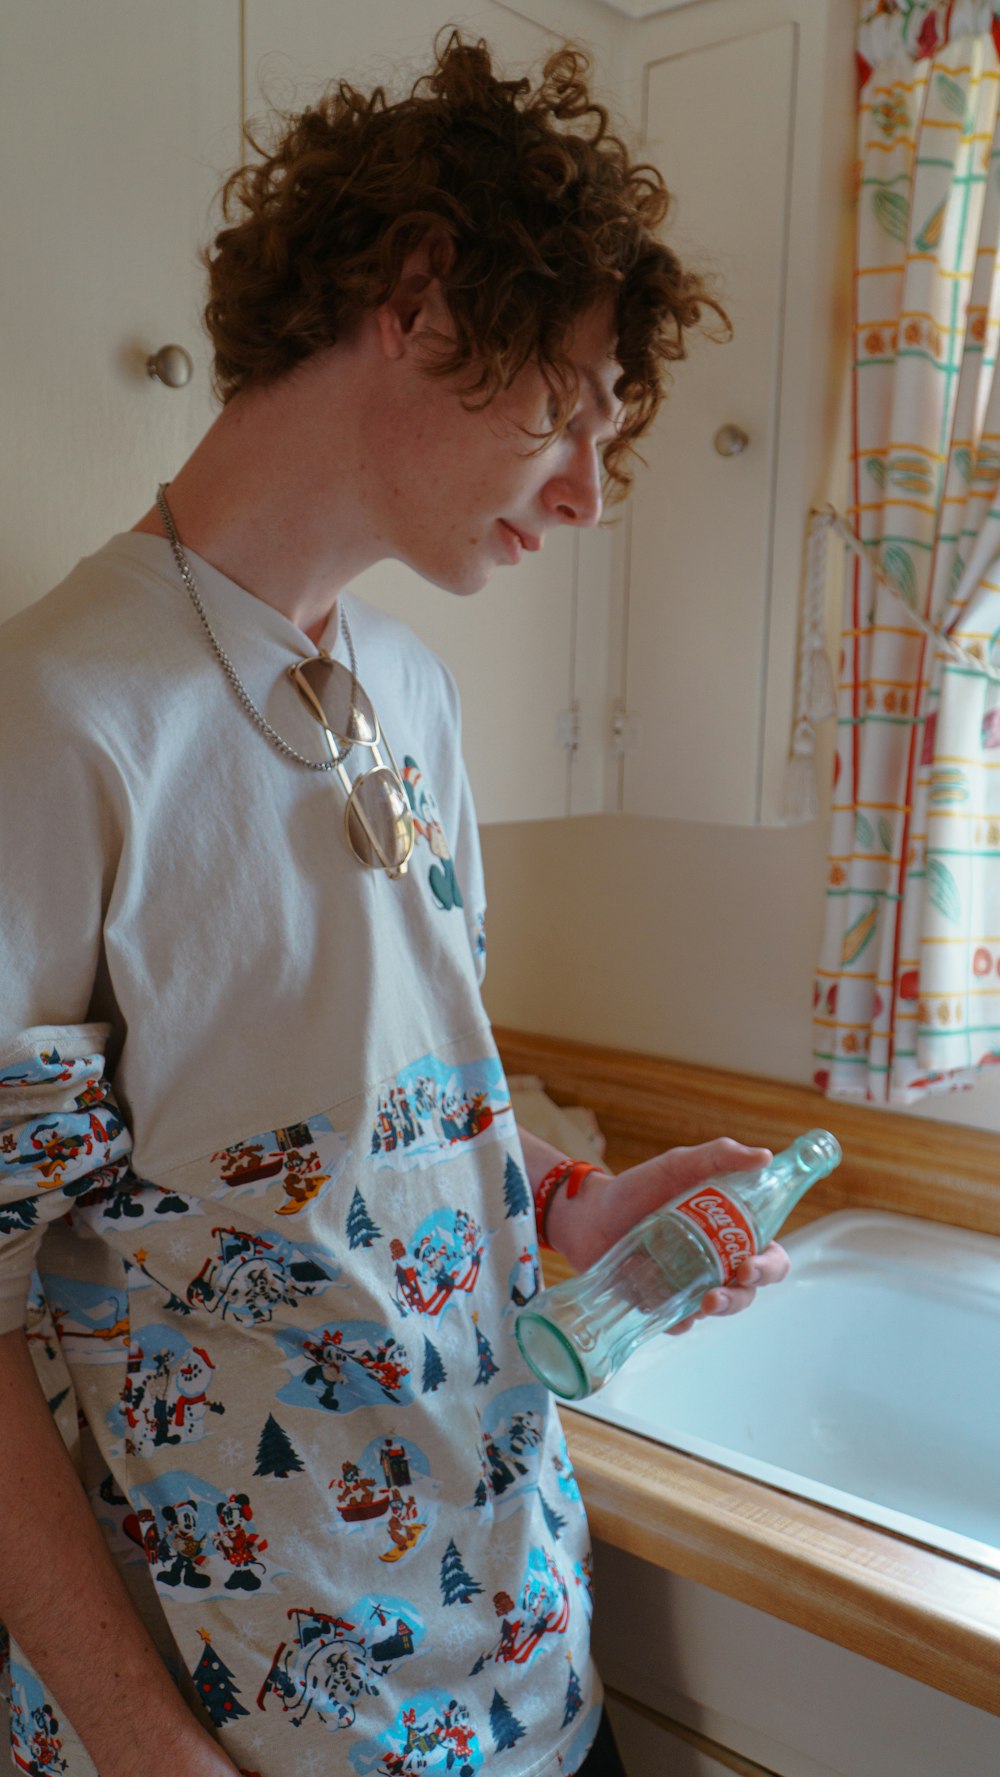 a man standing in front of a sink holding a bottle